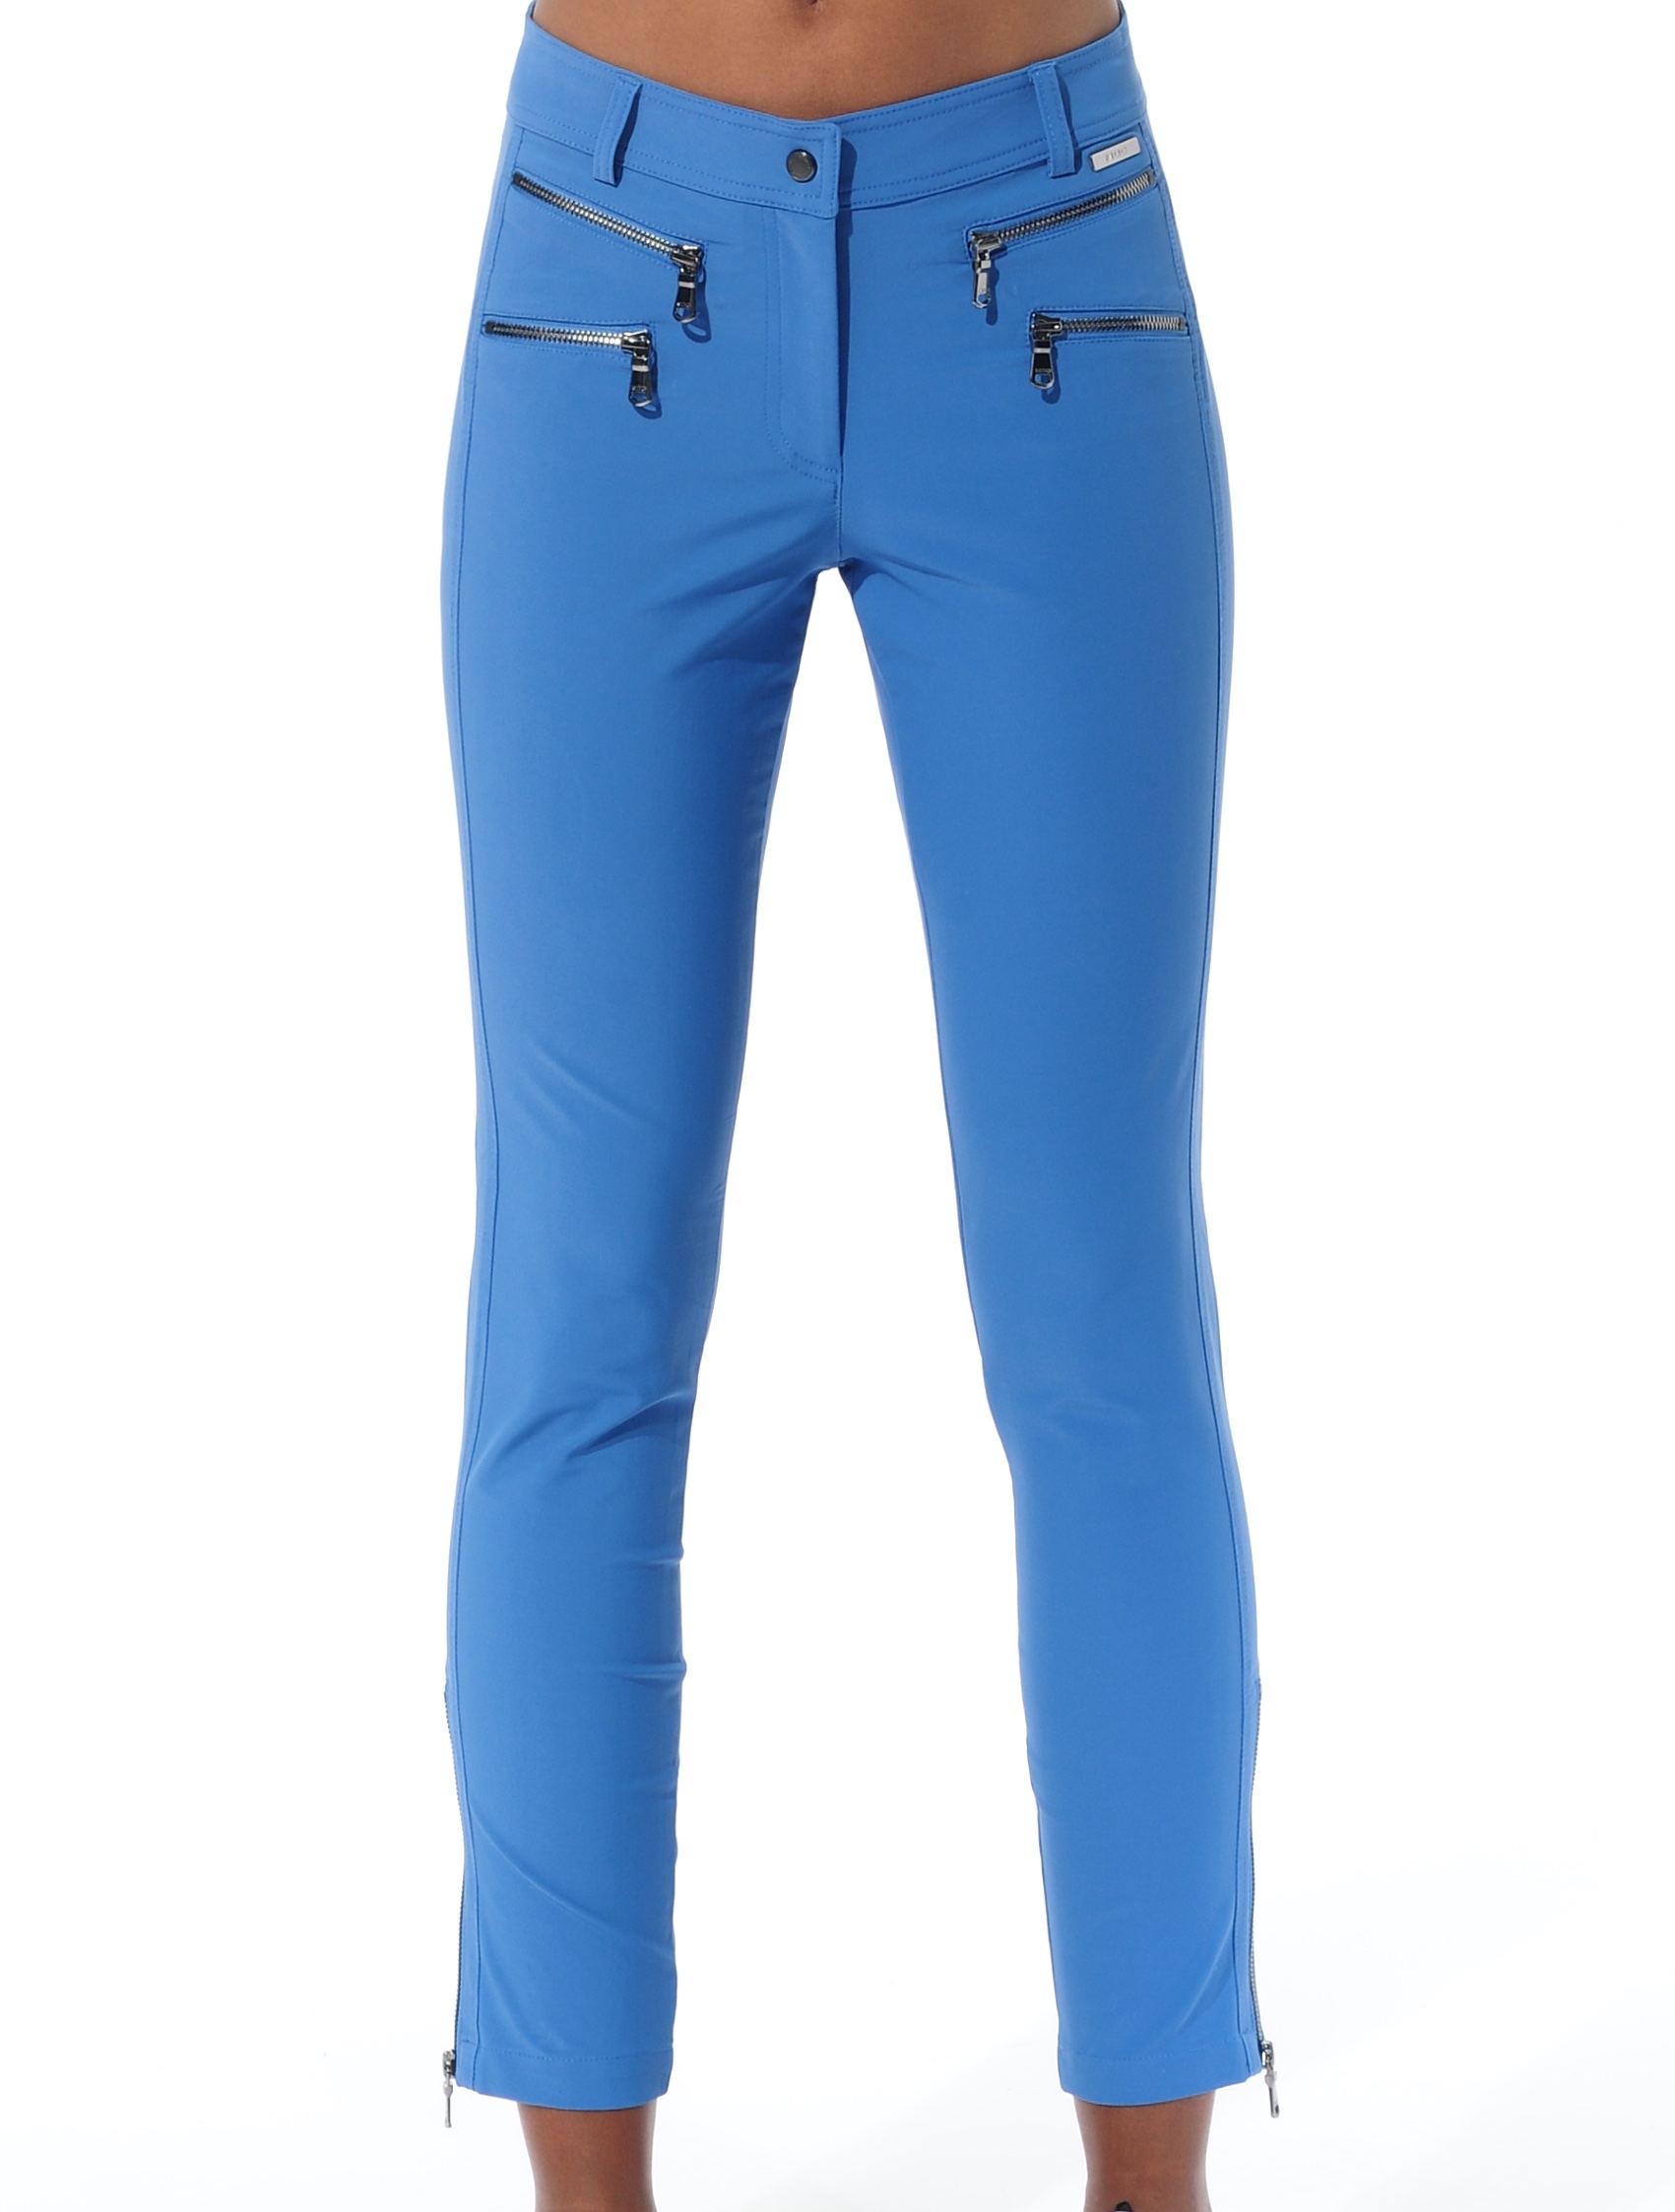 4way stretch double zip ankle pants ibiza 